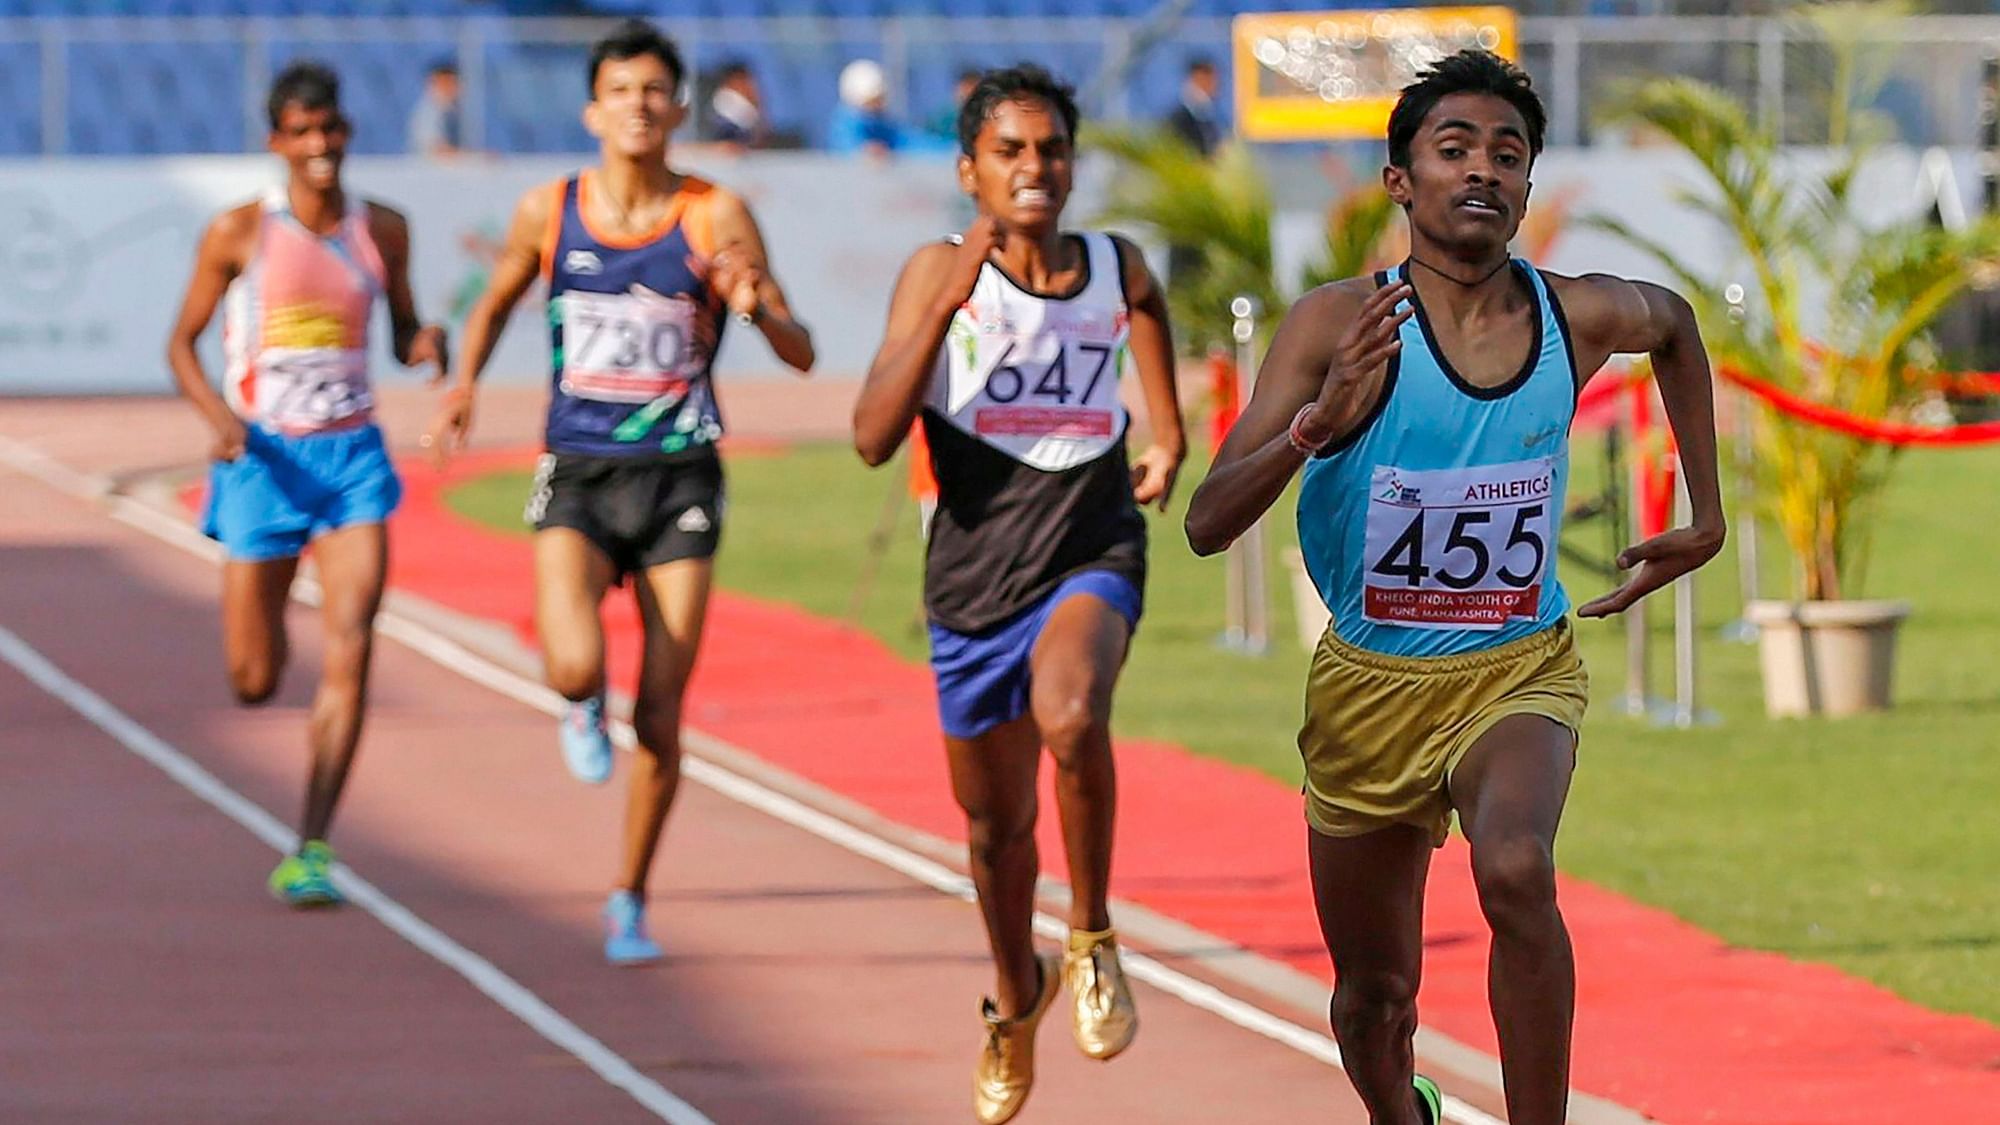 The third edition of the Khelo India Youth Games came to a close on Wednesday, 22 January with a glitzy ceremony, with Maharashtra being adjudged as the champion team with 256 medals, including 78 gold.